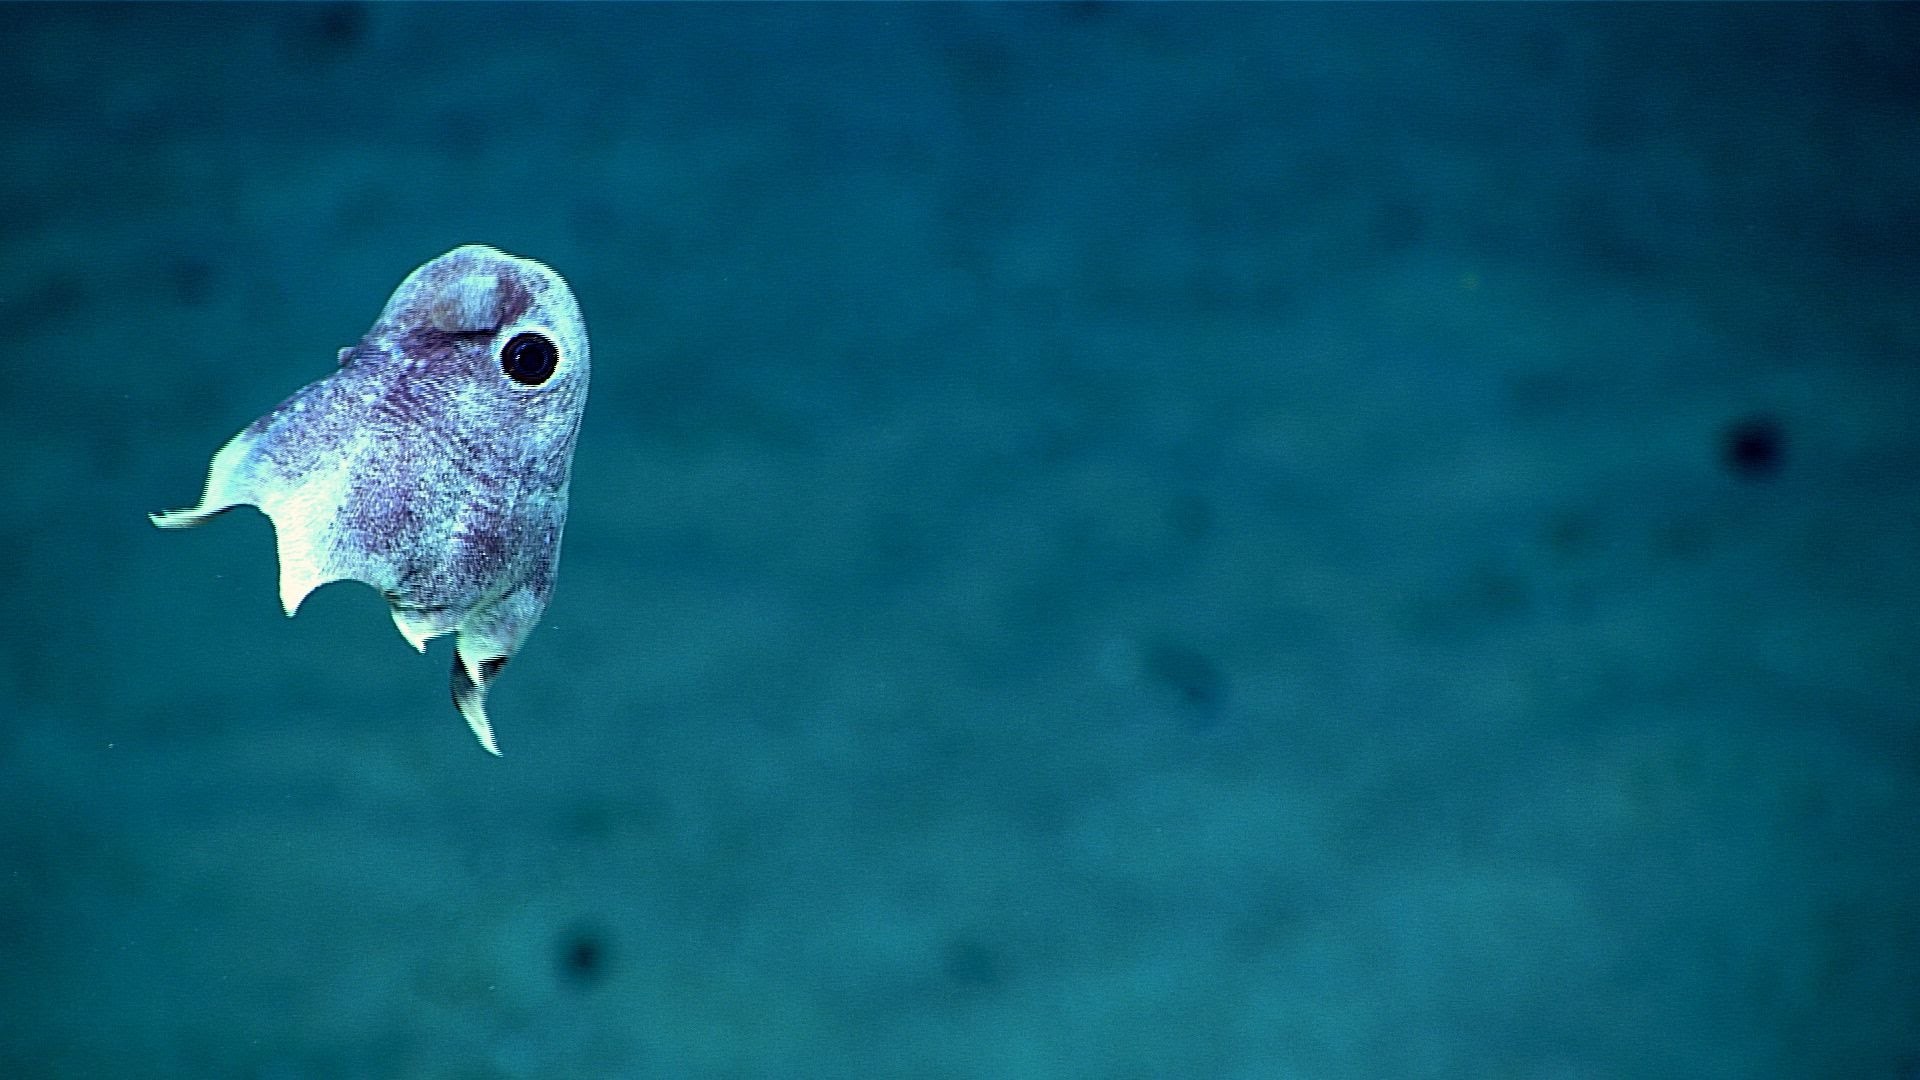 1920x1080, Scientists Just Captured Stunning Images - Deep Sea Creatures Cute - HD Wallpaper 